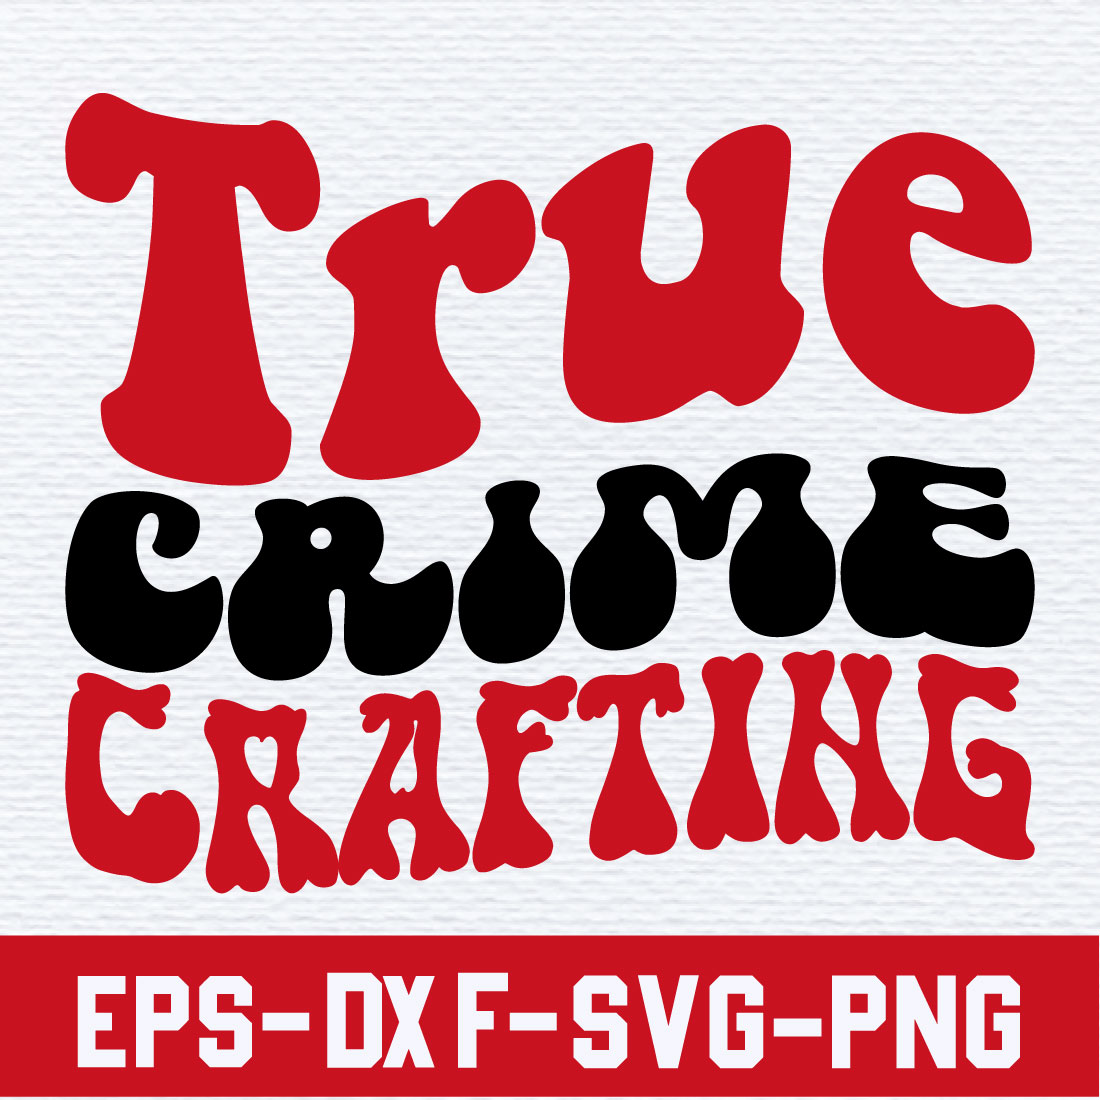 True Crime Crafting cover image.